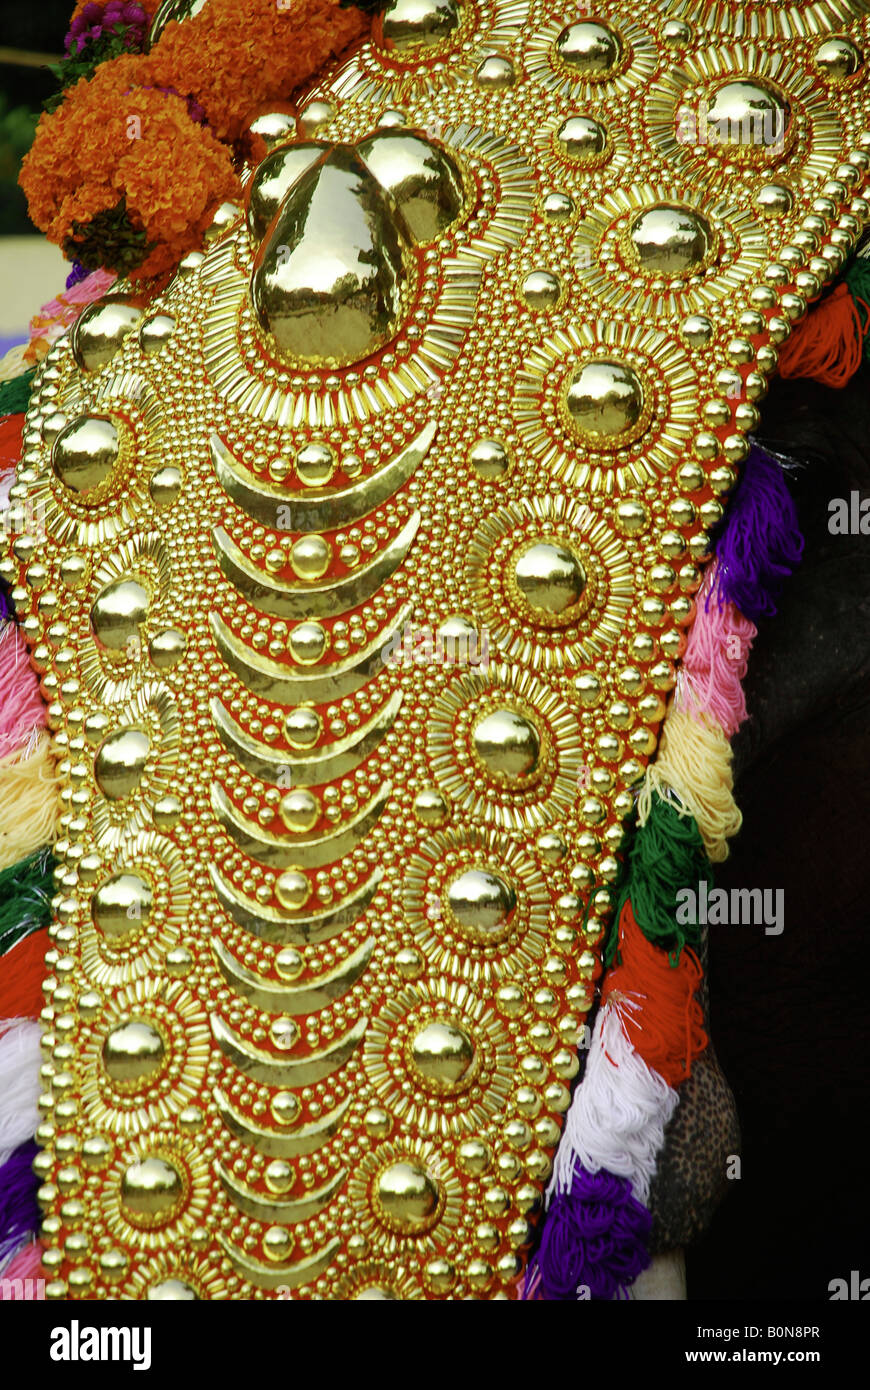 A decorated elephant during the Temple festival kerala India Stock Photo